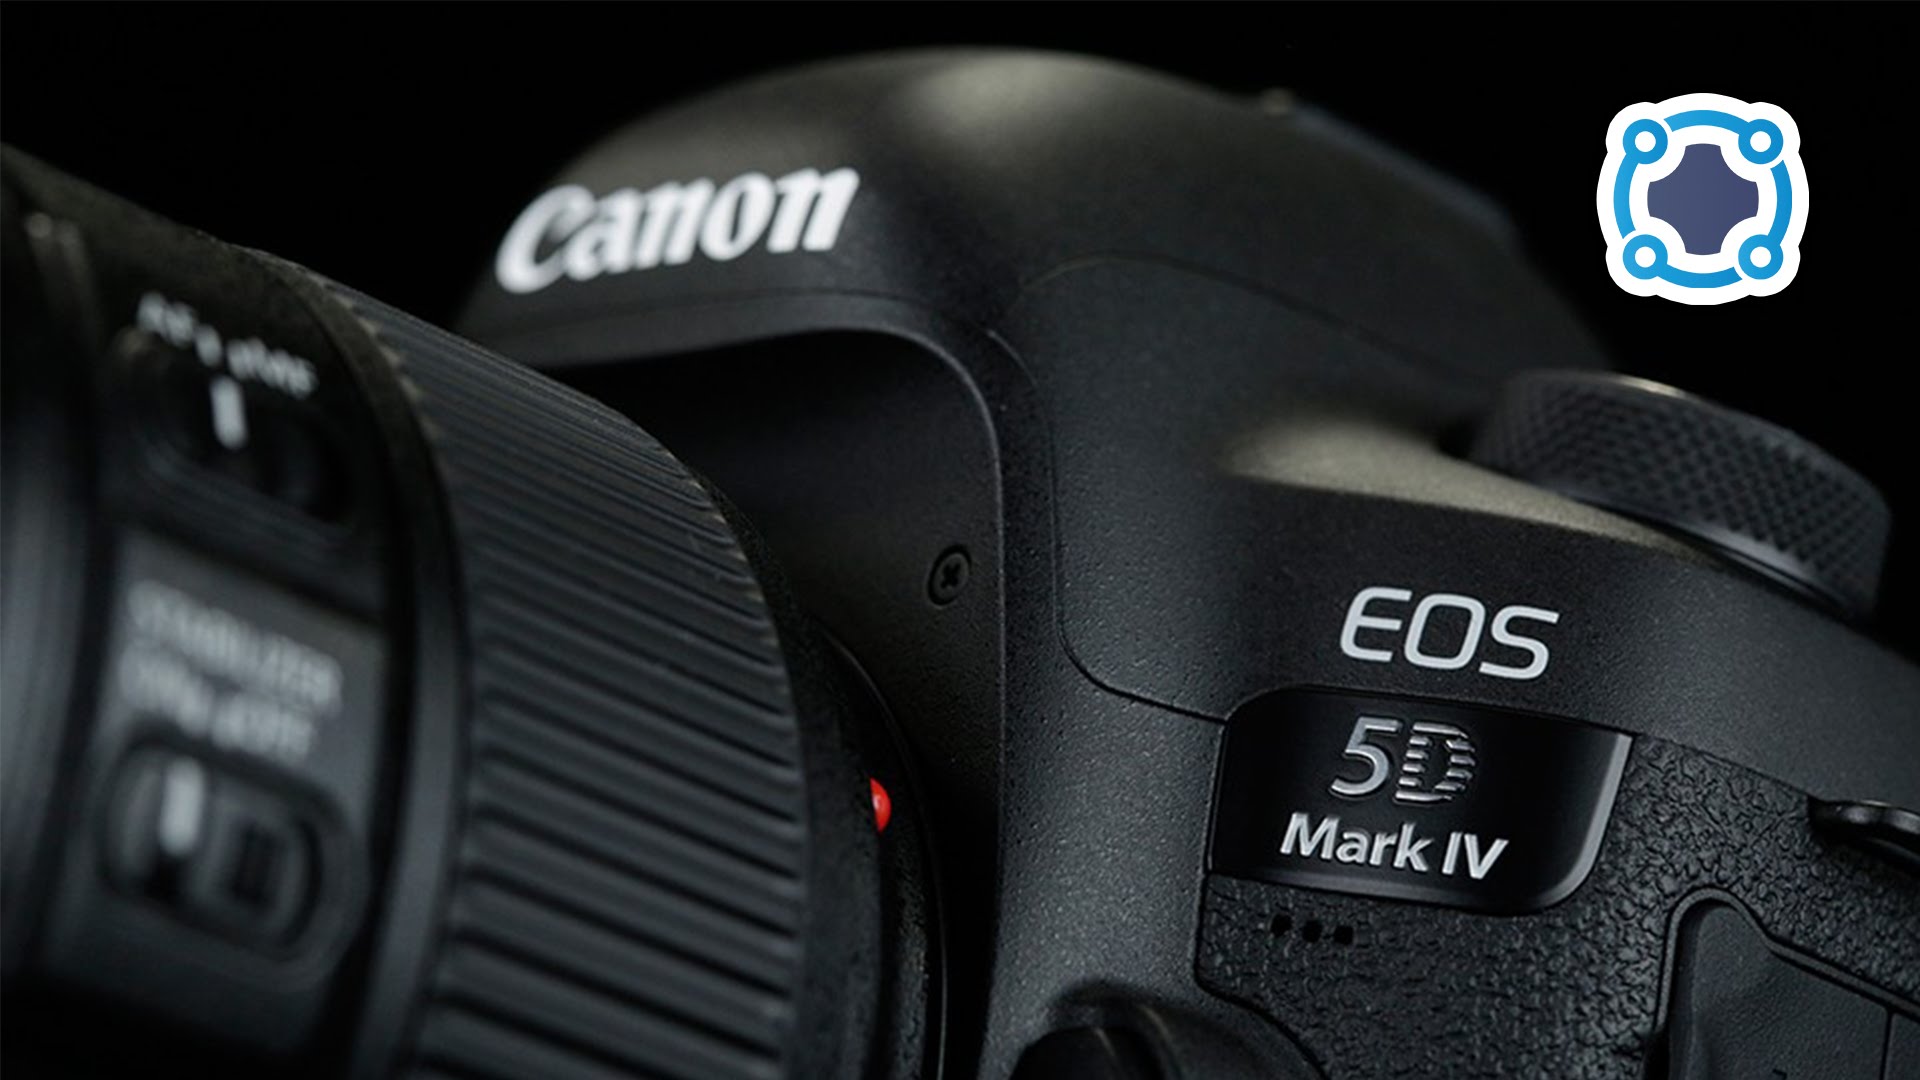 Thoughts - Canon 5D Mark IV (Is it worth $3500?)